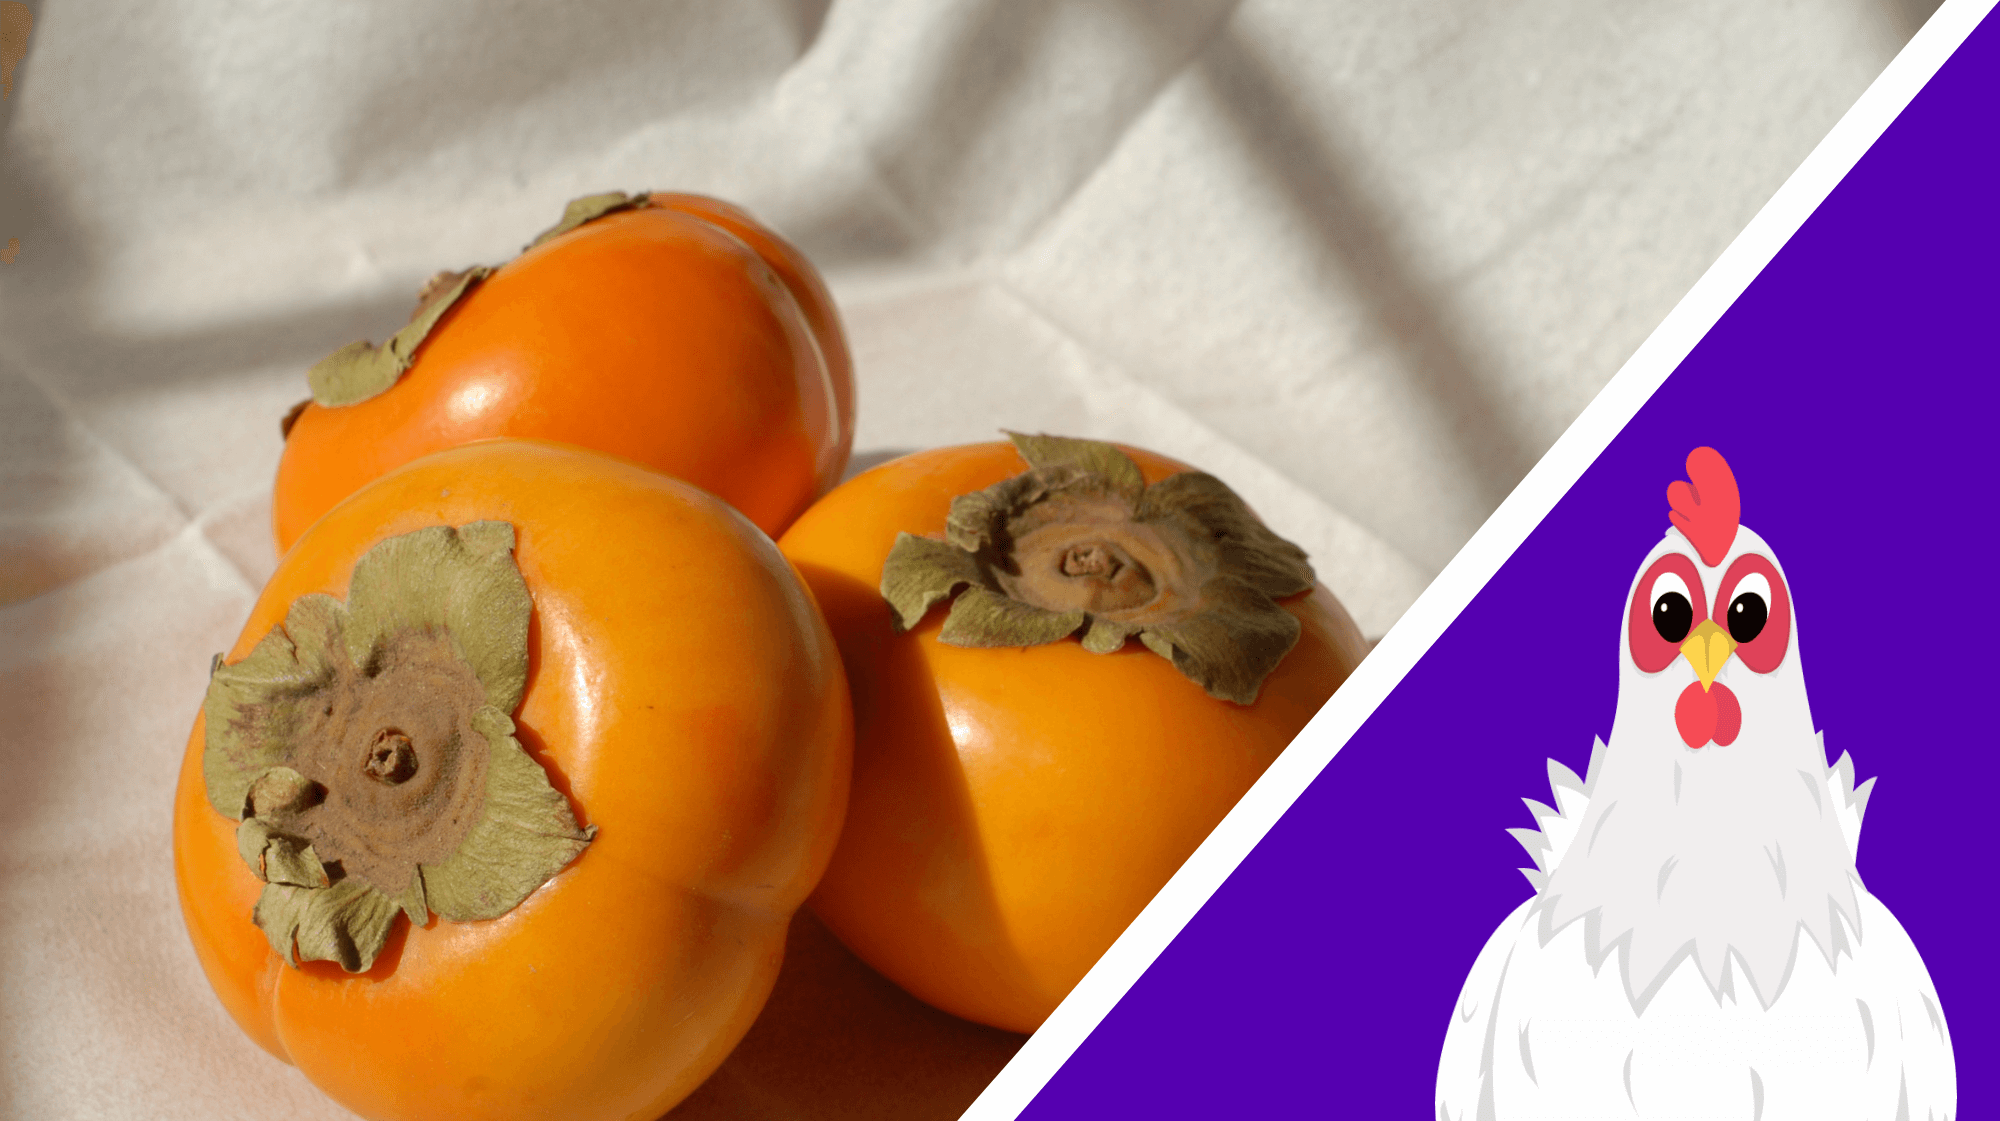 eating persimmons chickens